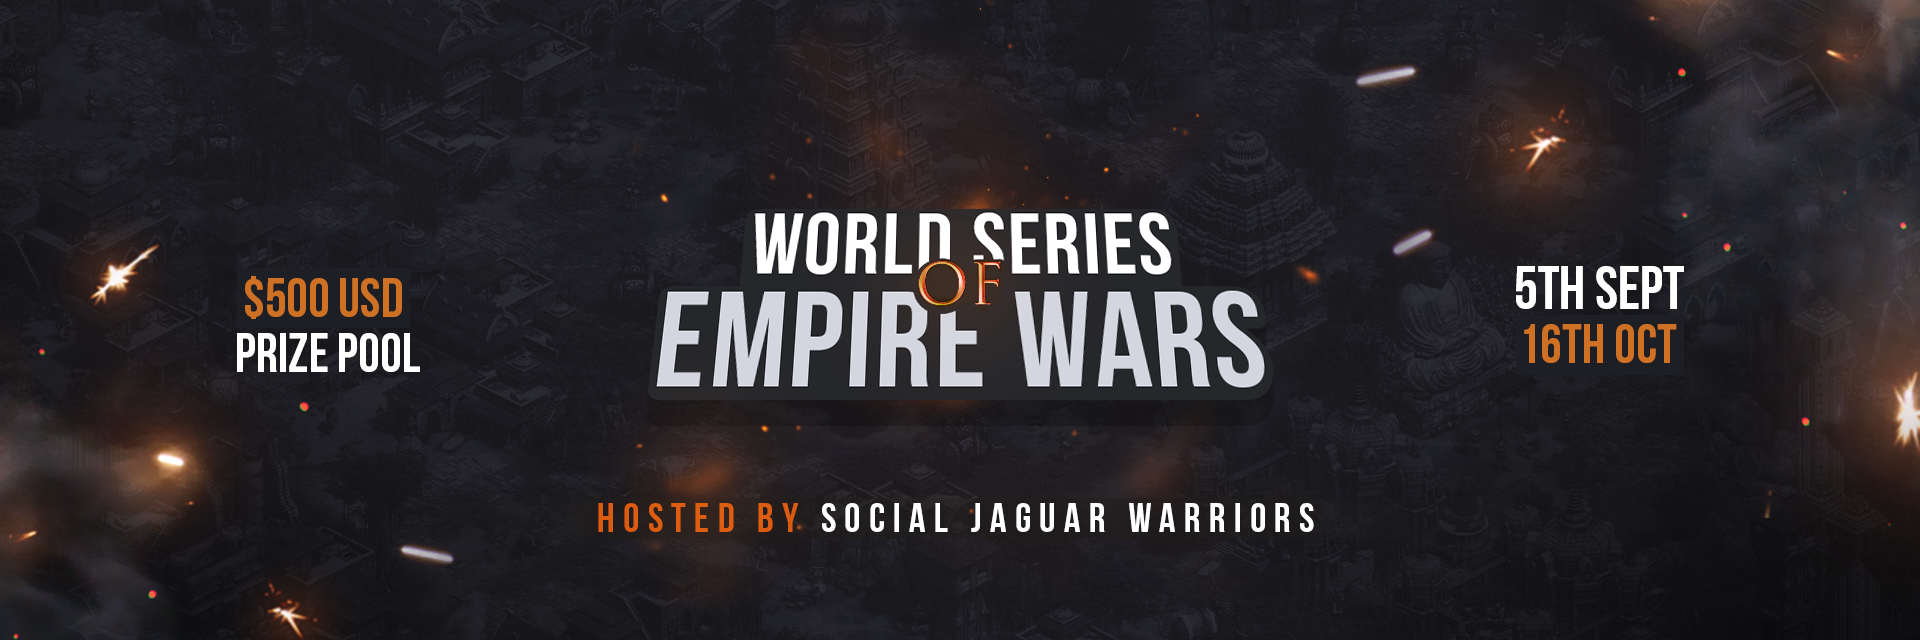 World Series of Empire Wars v2.png